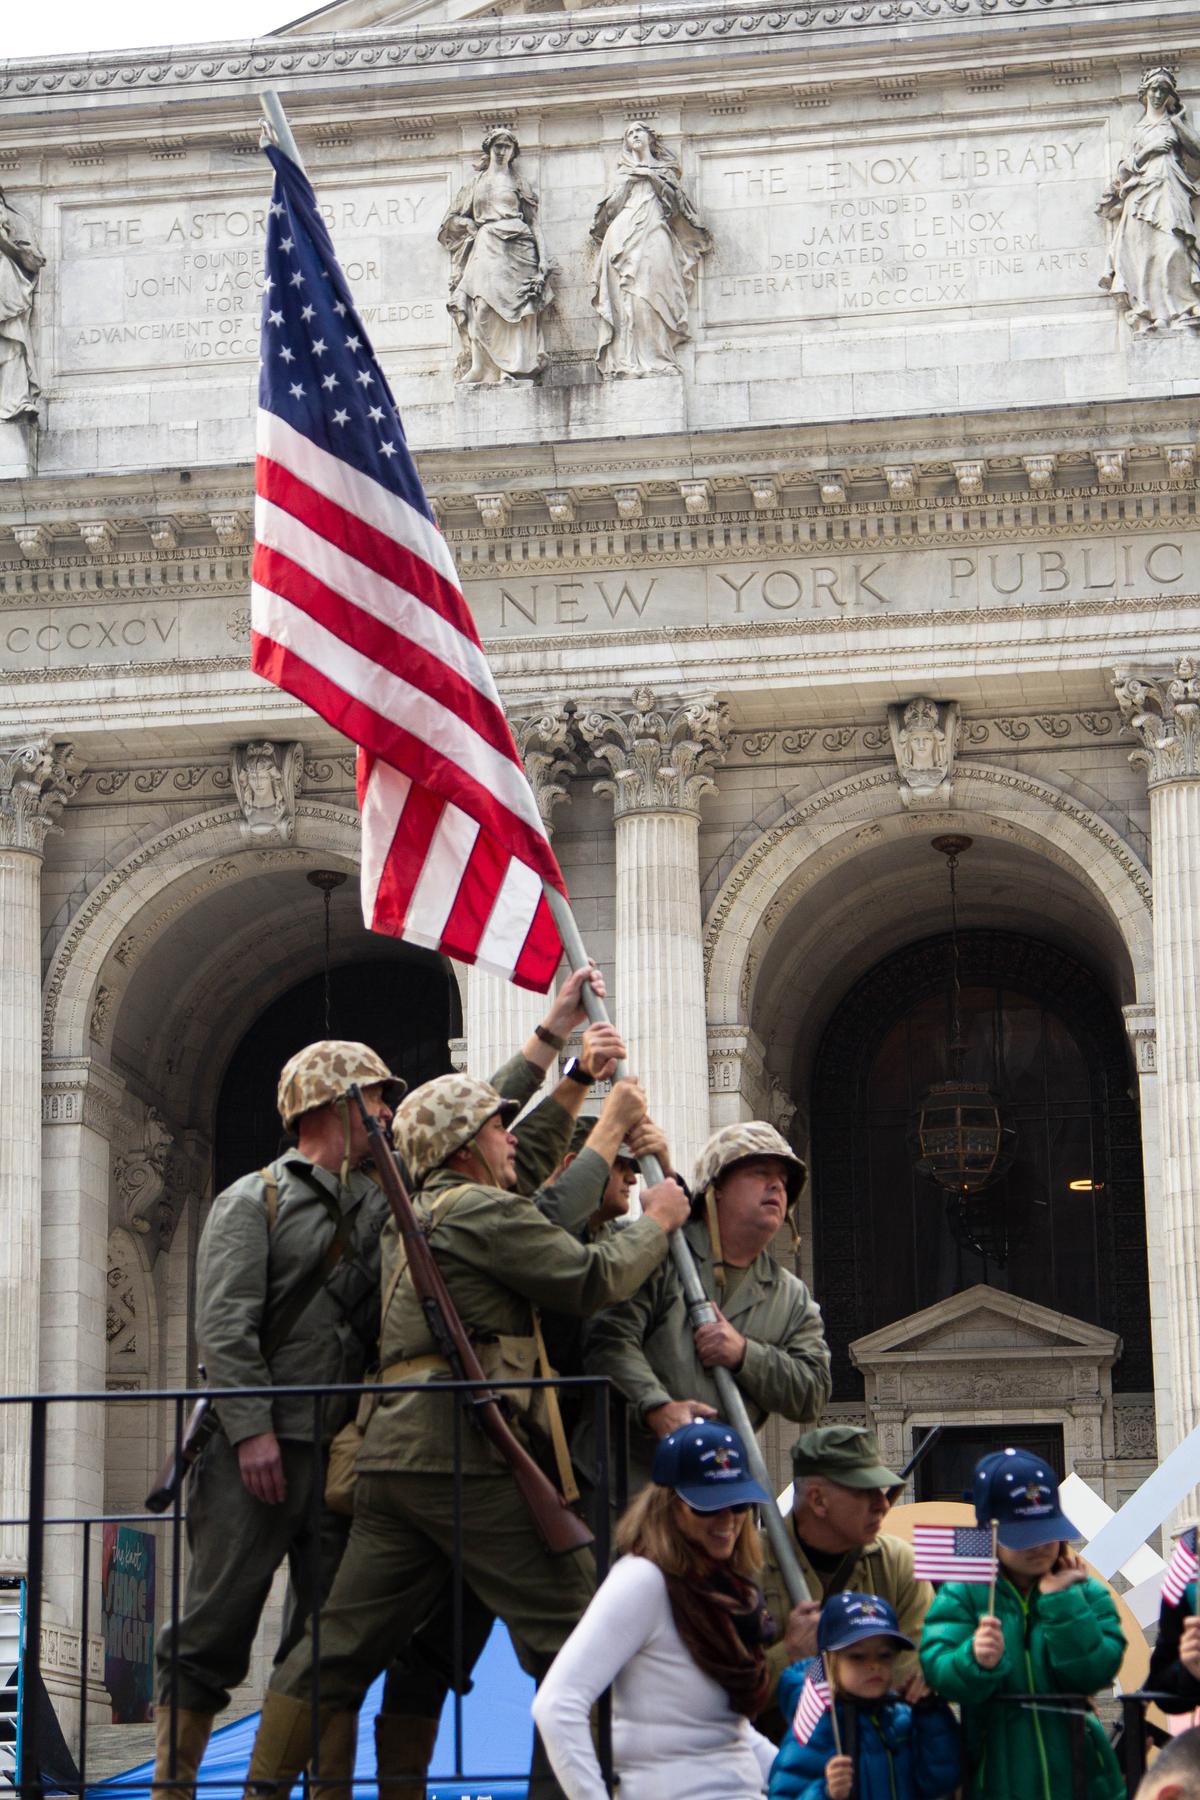 Participants at the Veterans Day Parade in New York City on Nov. 11, 2019. (Chung I Ho/The Epoch Times)